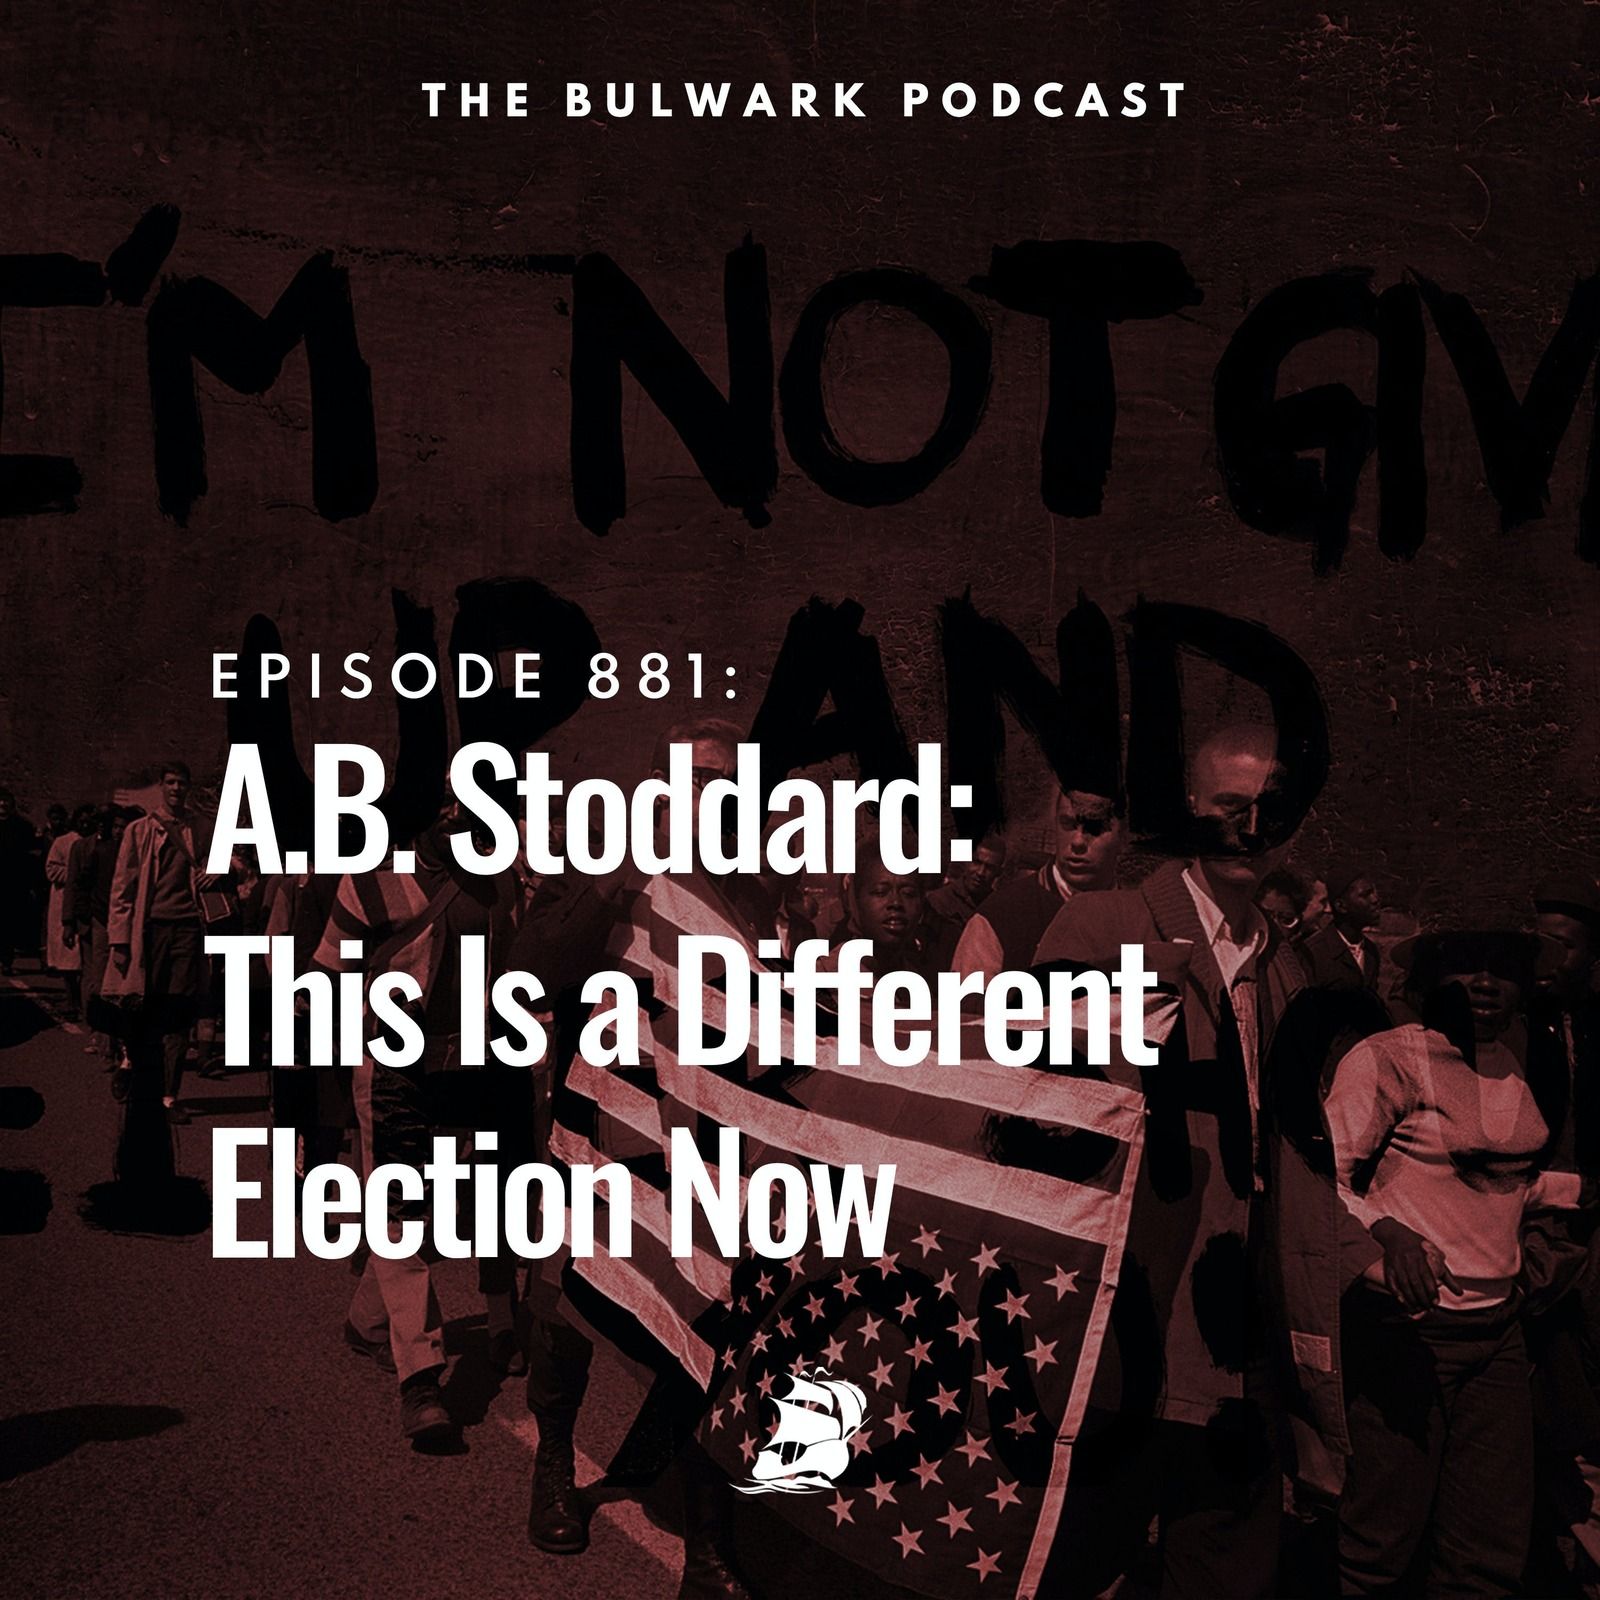 A.B. Stoddard: This Is a Different Election Now